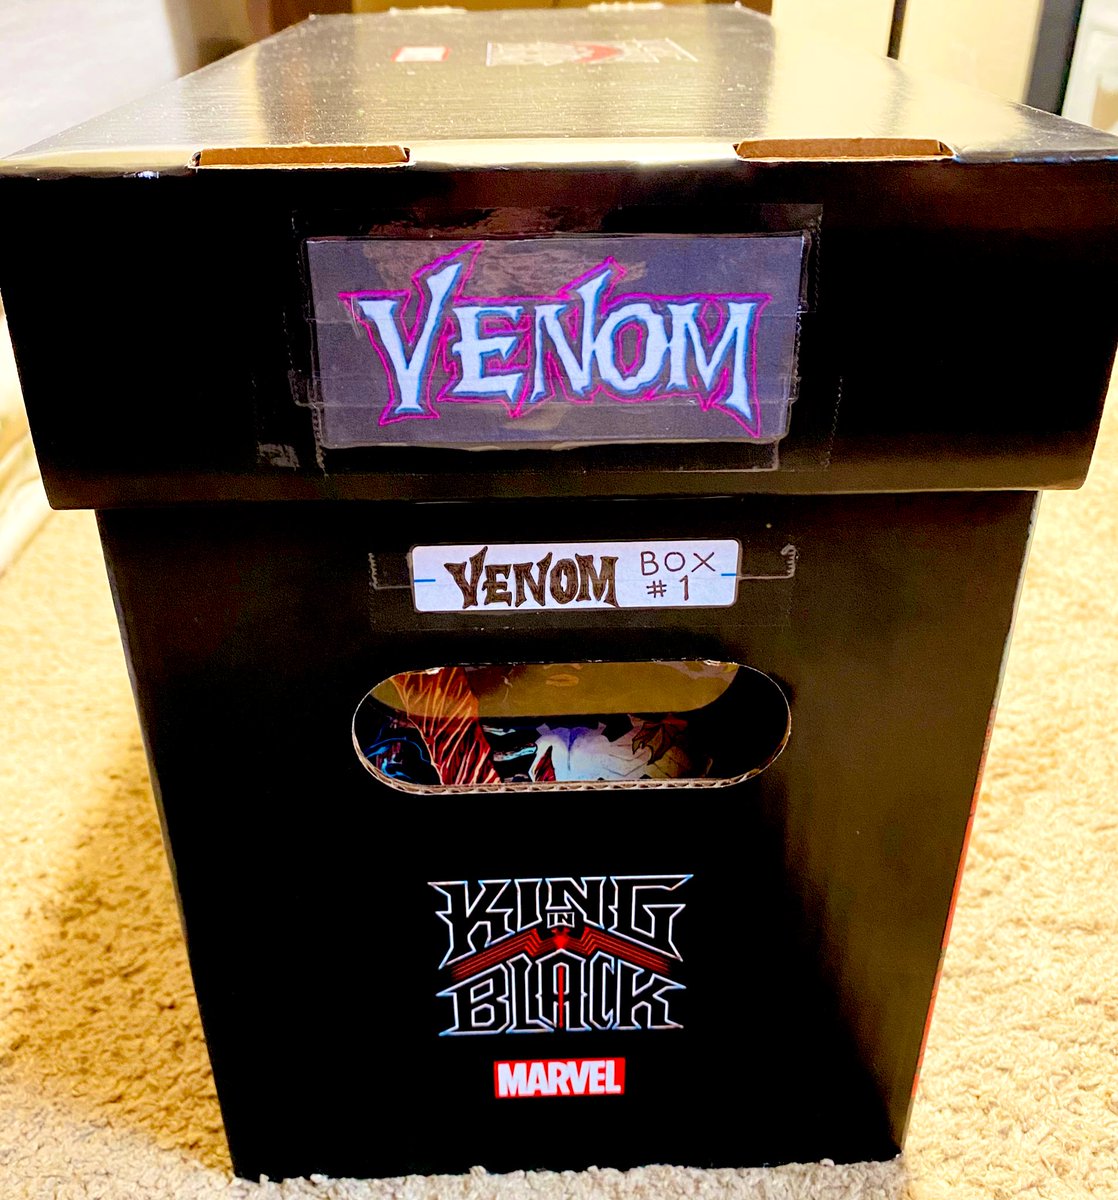 My shop doesn’t open until 2 so here’s my #Venom box patiently waiting for issue #200 so I can close it up😭 #ComicWednesday